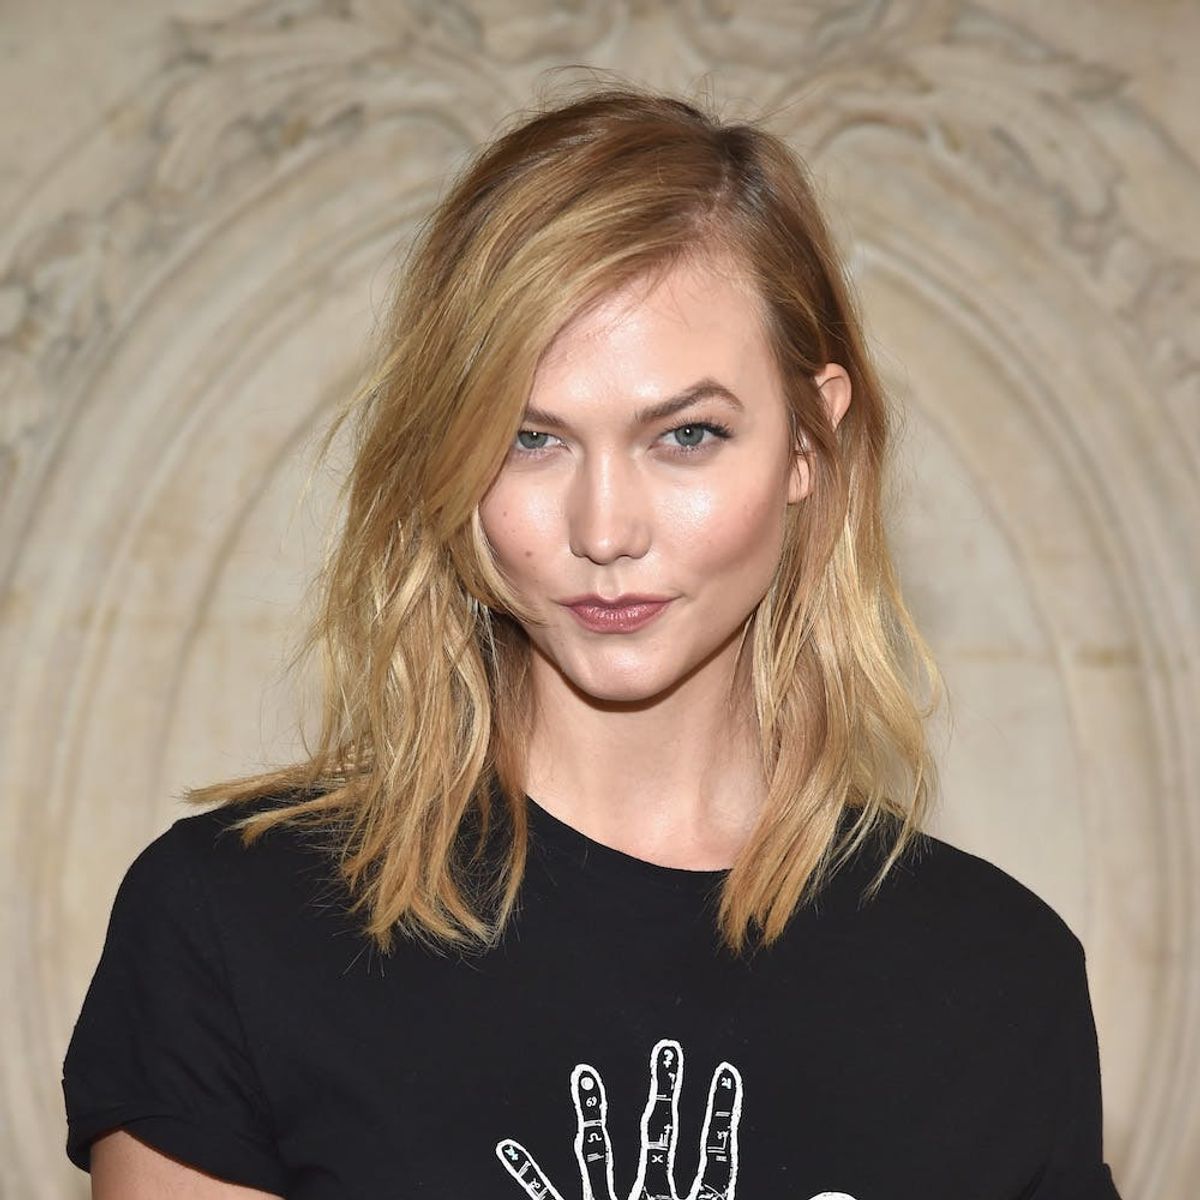 Karlie Kloss’s Coding Summer Camp for Girls Is Giving Out 300 Scholarships